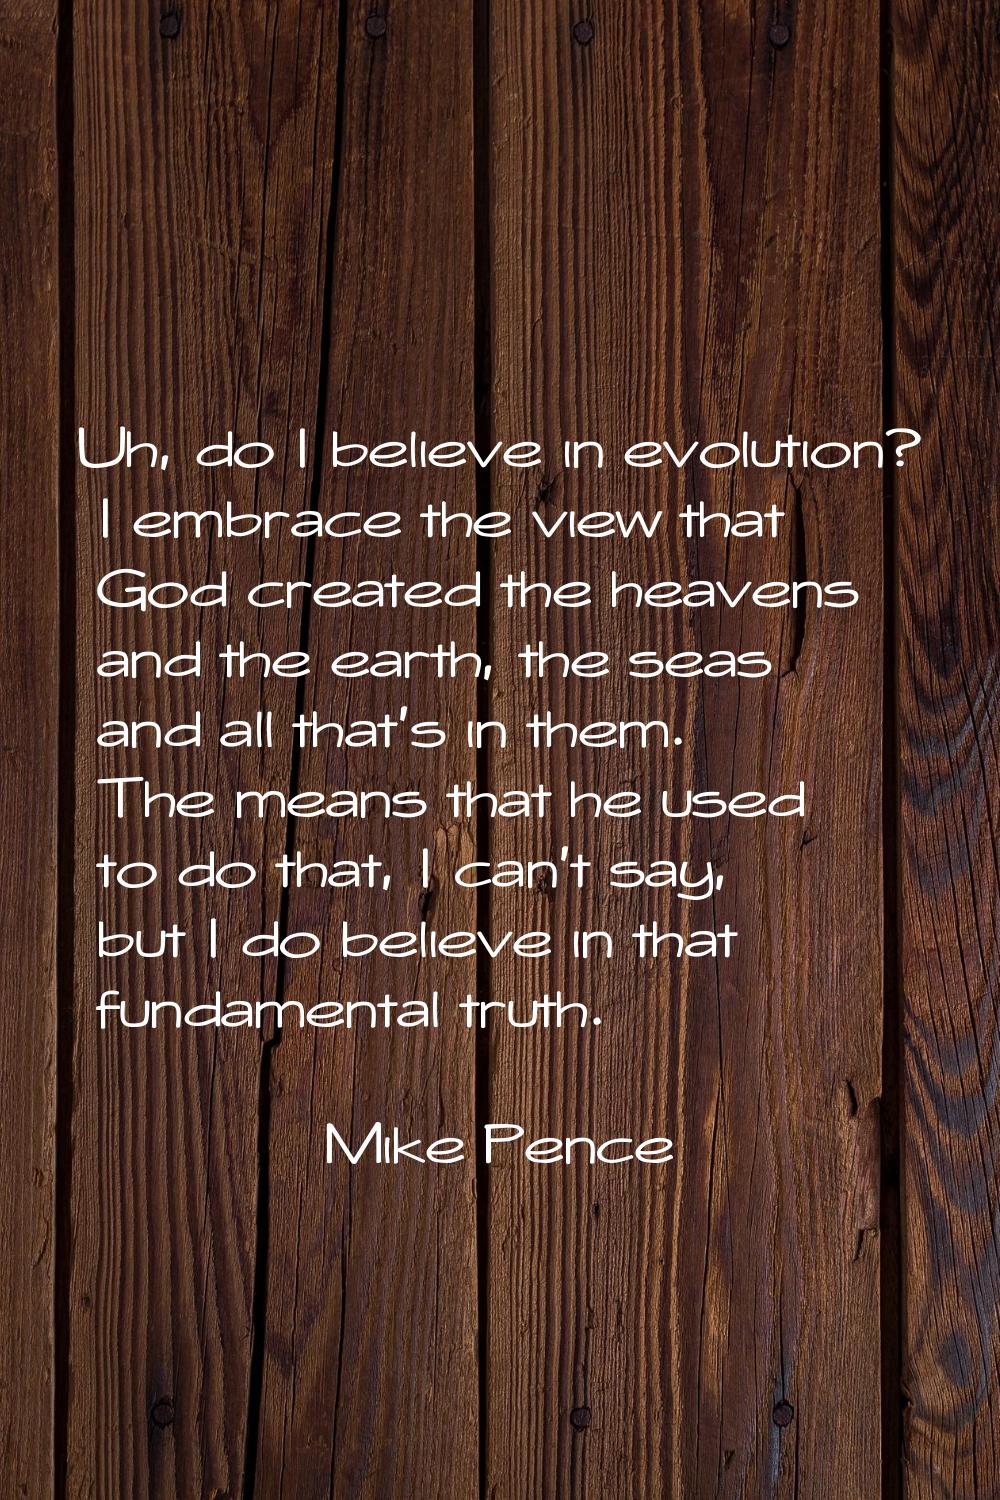 Uh, do I believe in evolution? I embrace the view that God created the heavens and the earth, the s